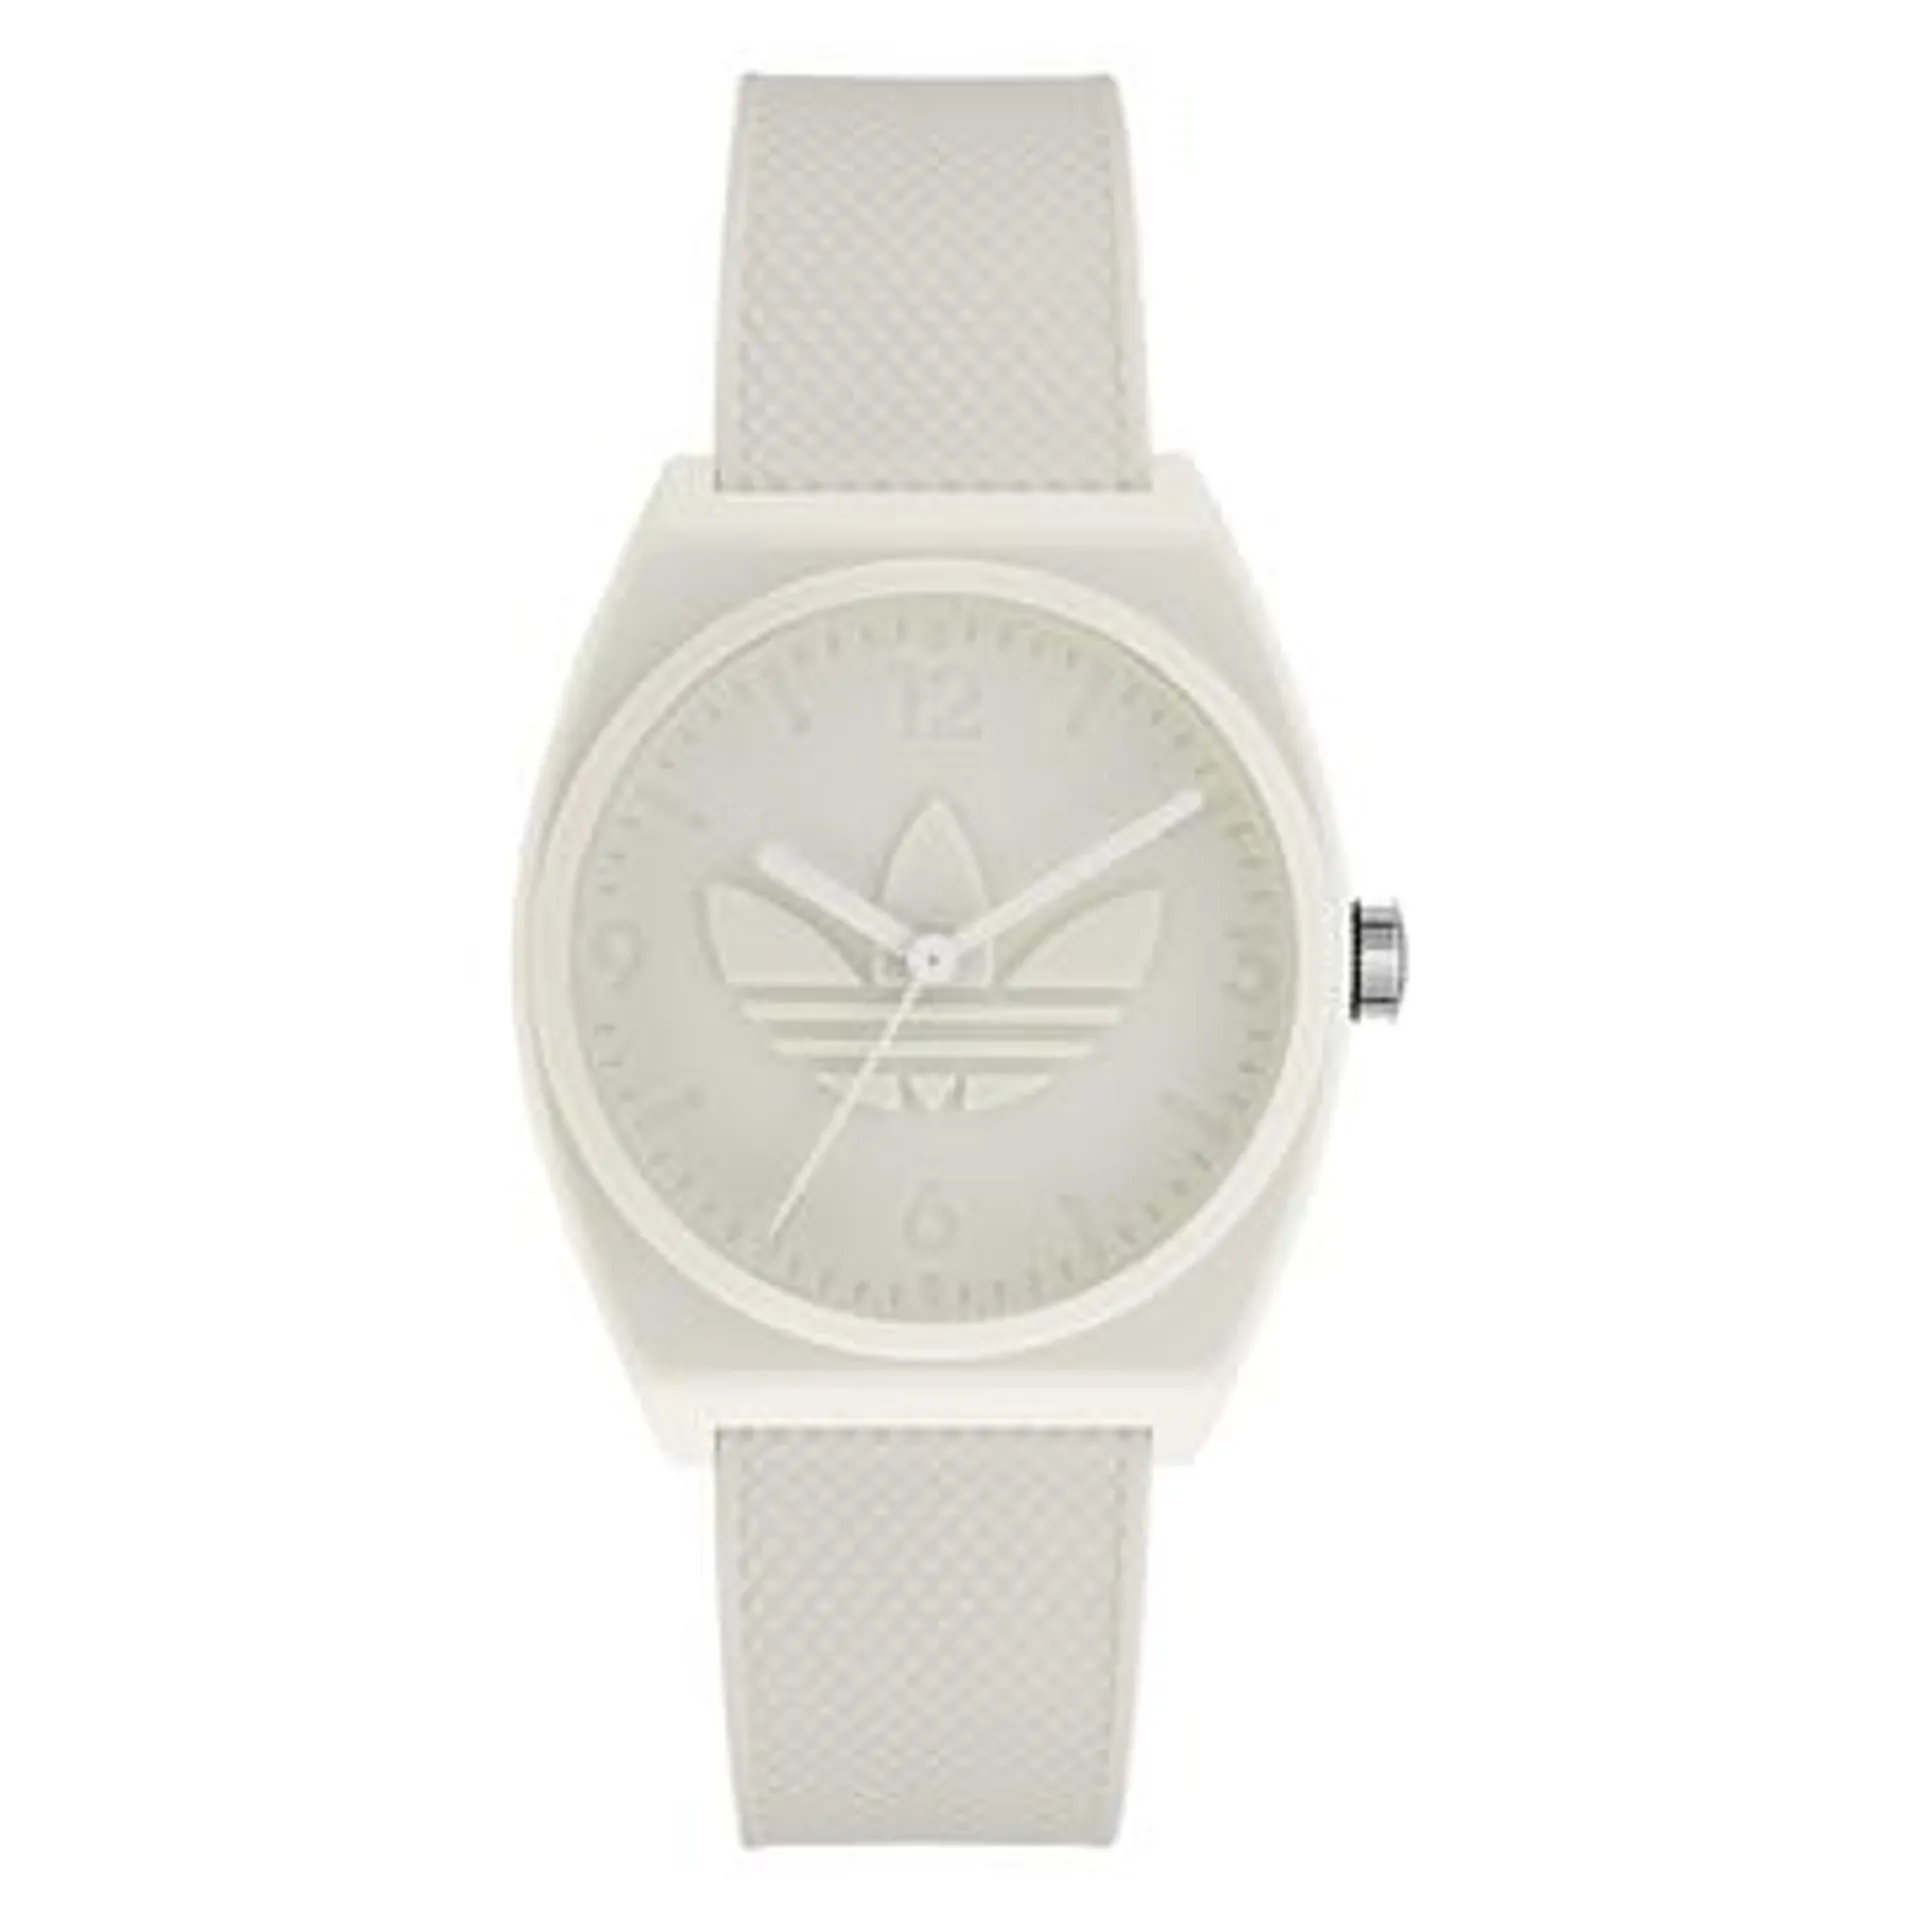 Adidas Project Two Unisex Watch